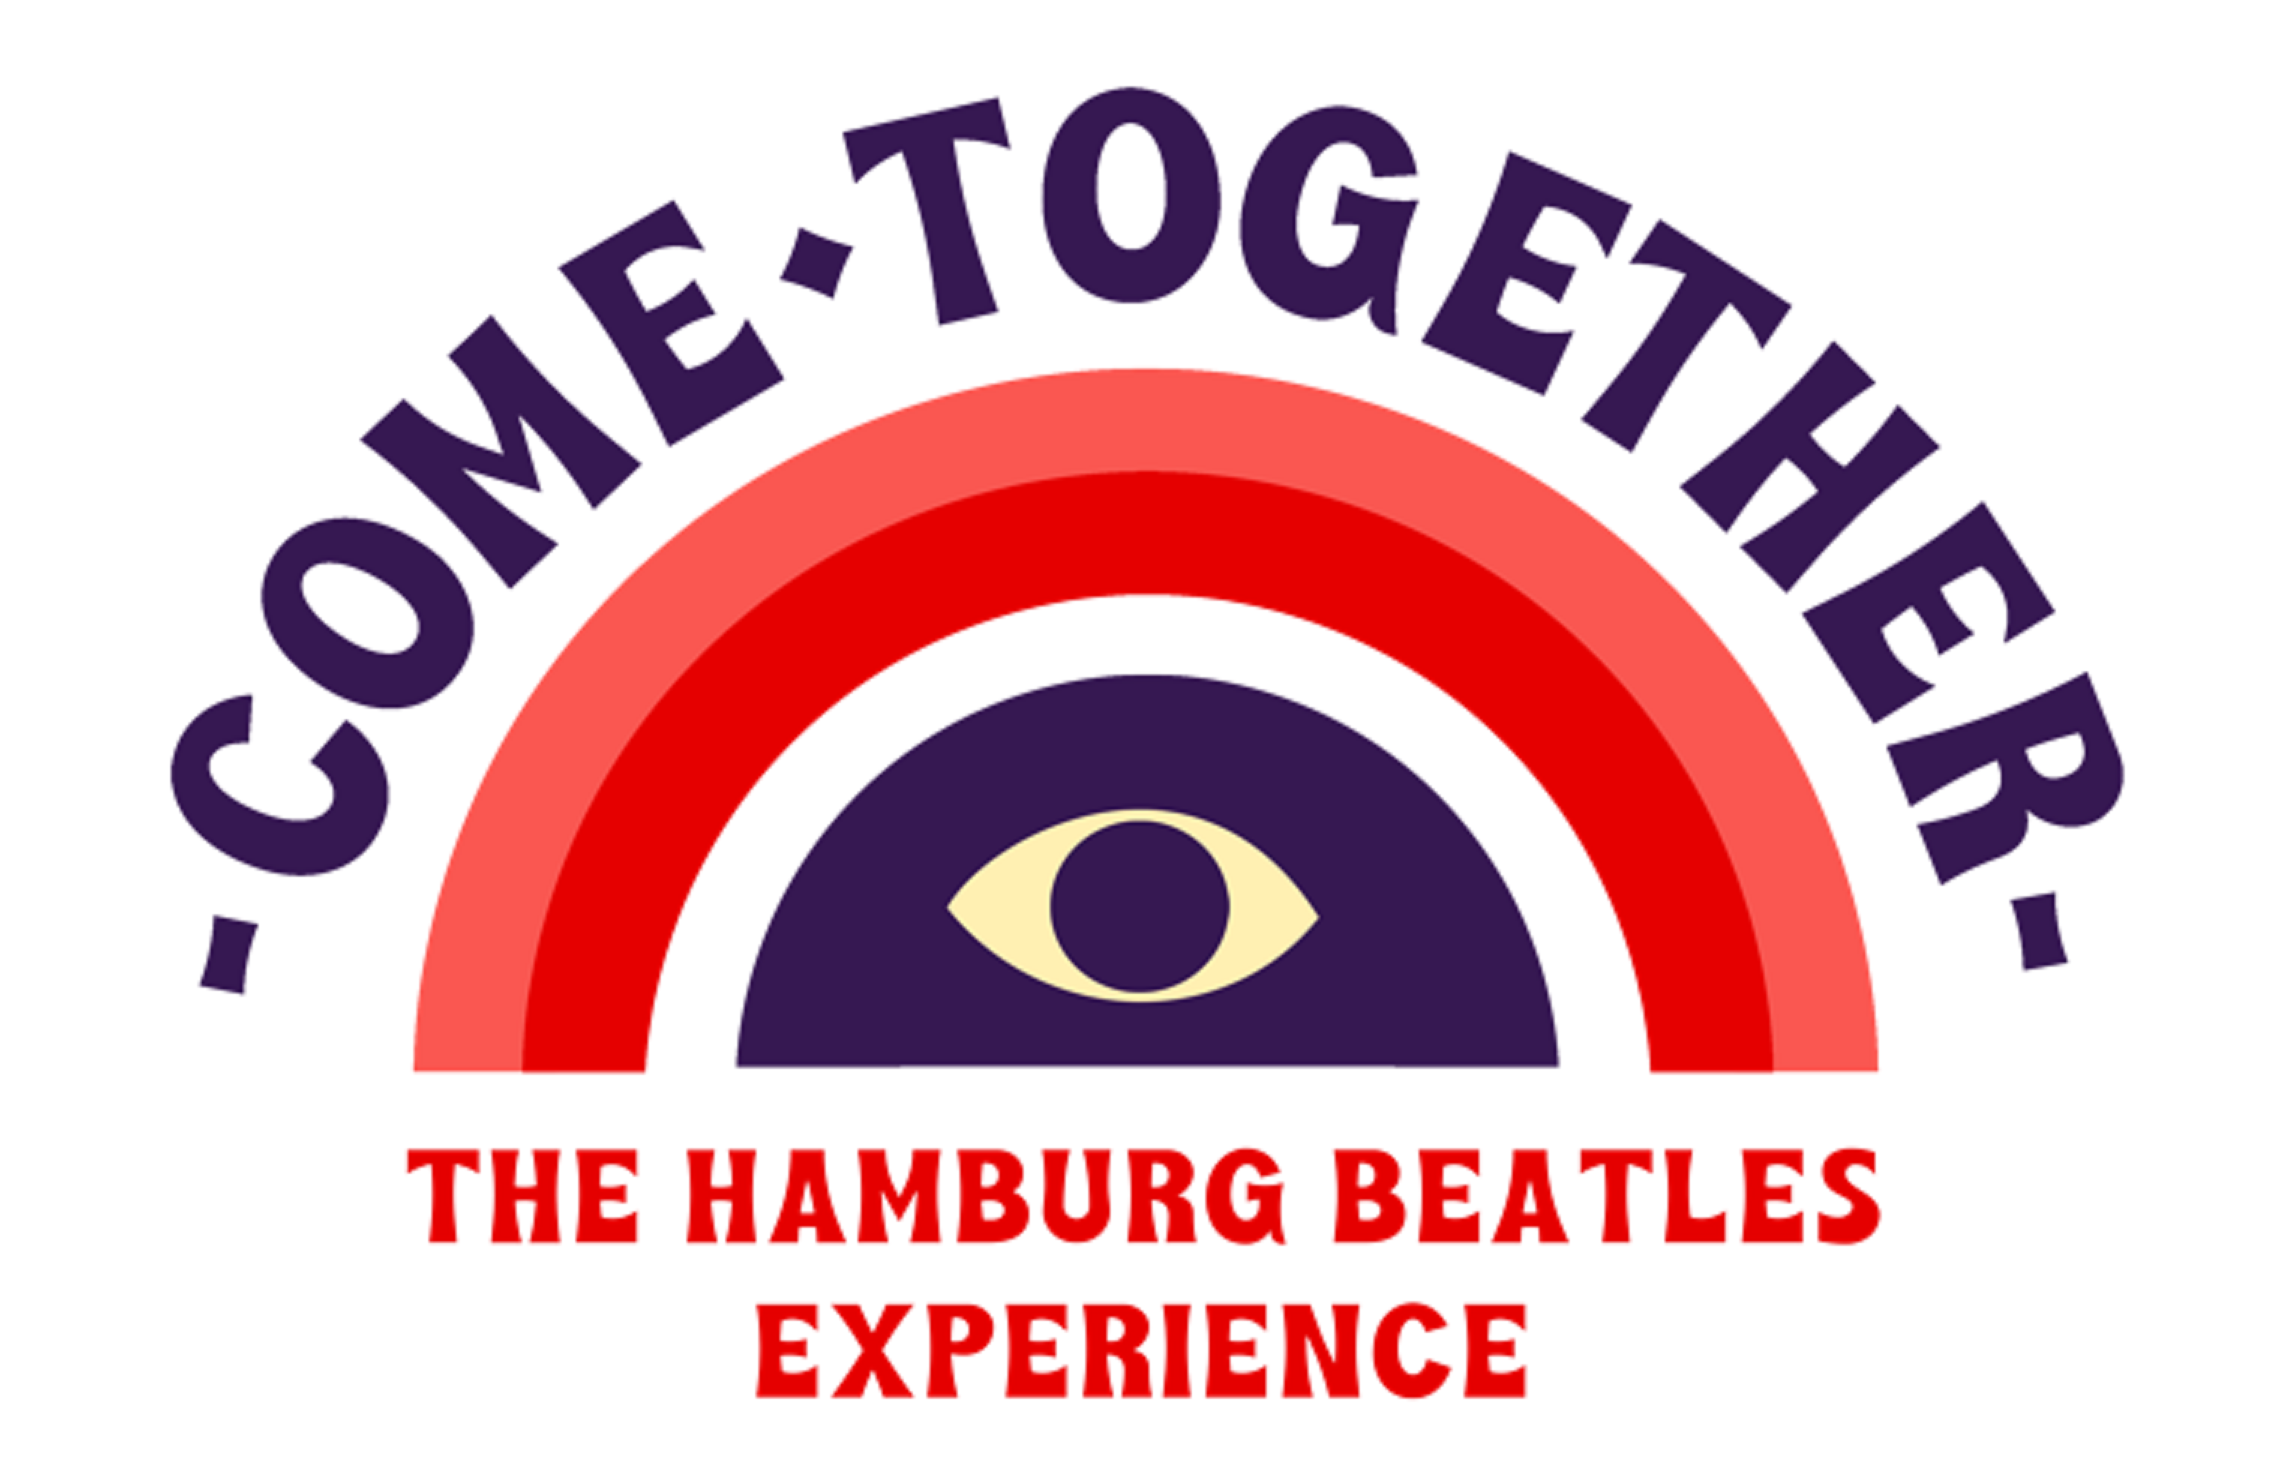 Come Together Experience - The Hamburg Beatles Experience